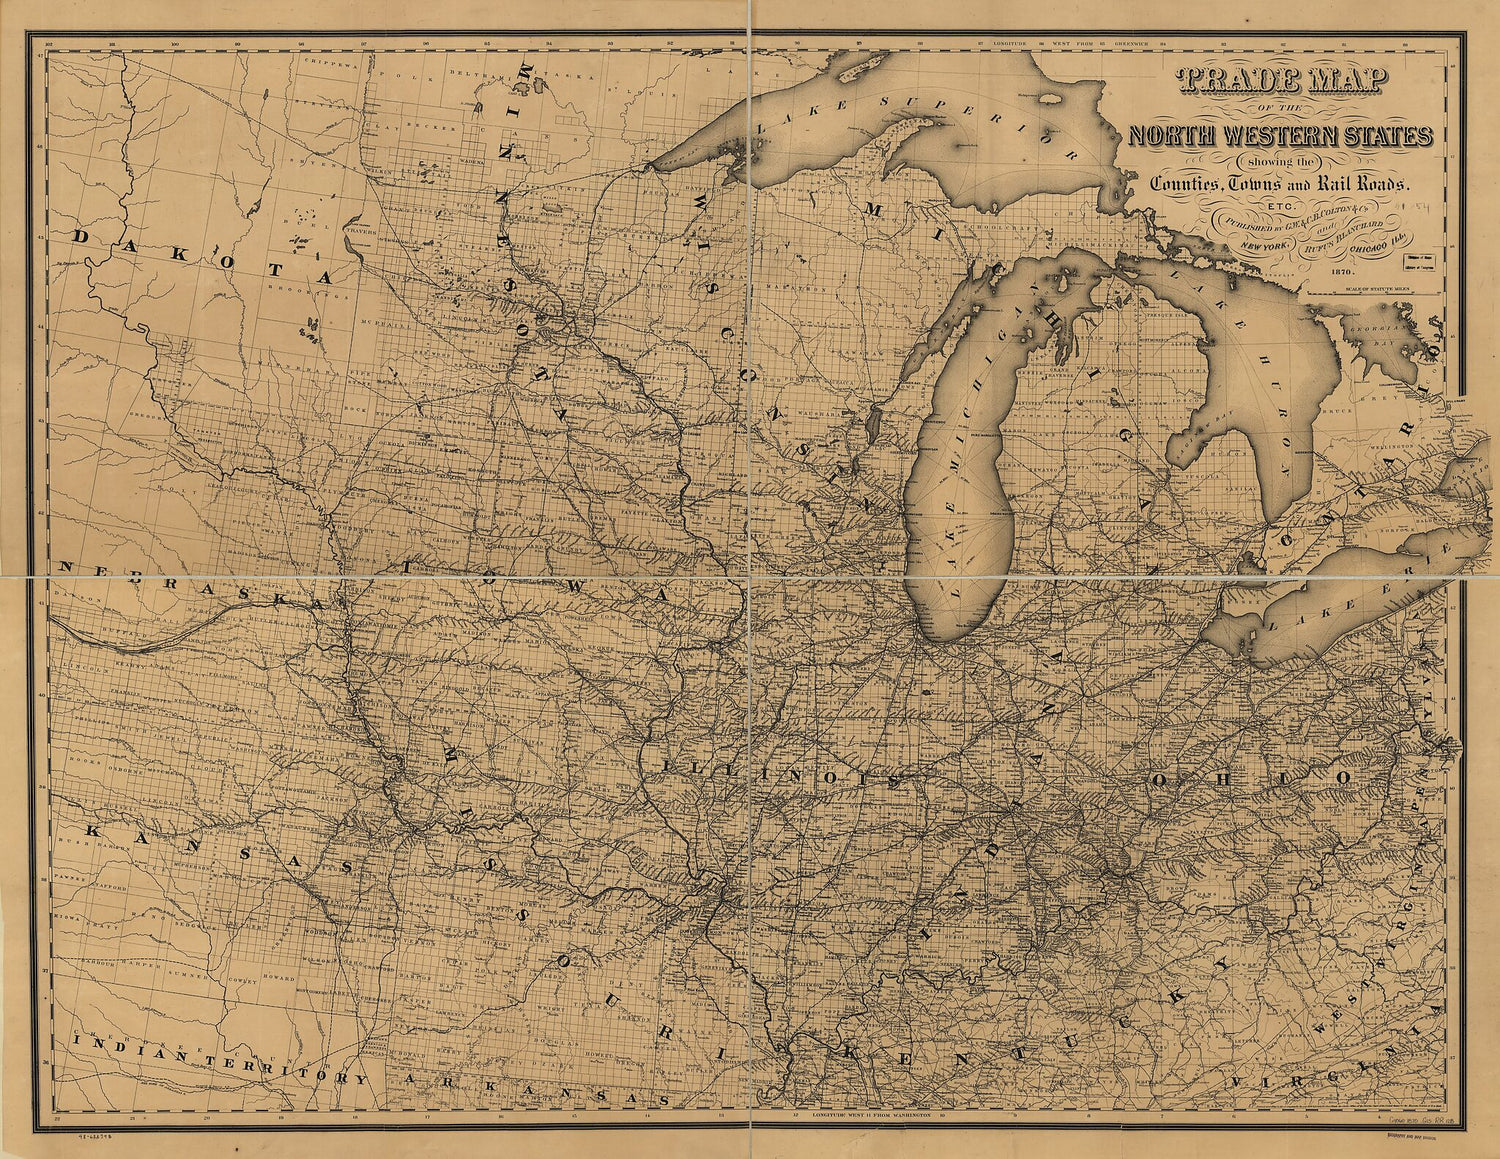 This old map of Trade Map of the North Western States Showing the Counties, Towns and Rail Roads, Etc from 1870 was created by  G.W. &amp; C.B. Colton &amp; Co in 1870